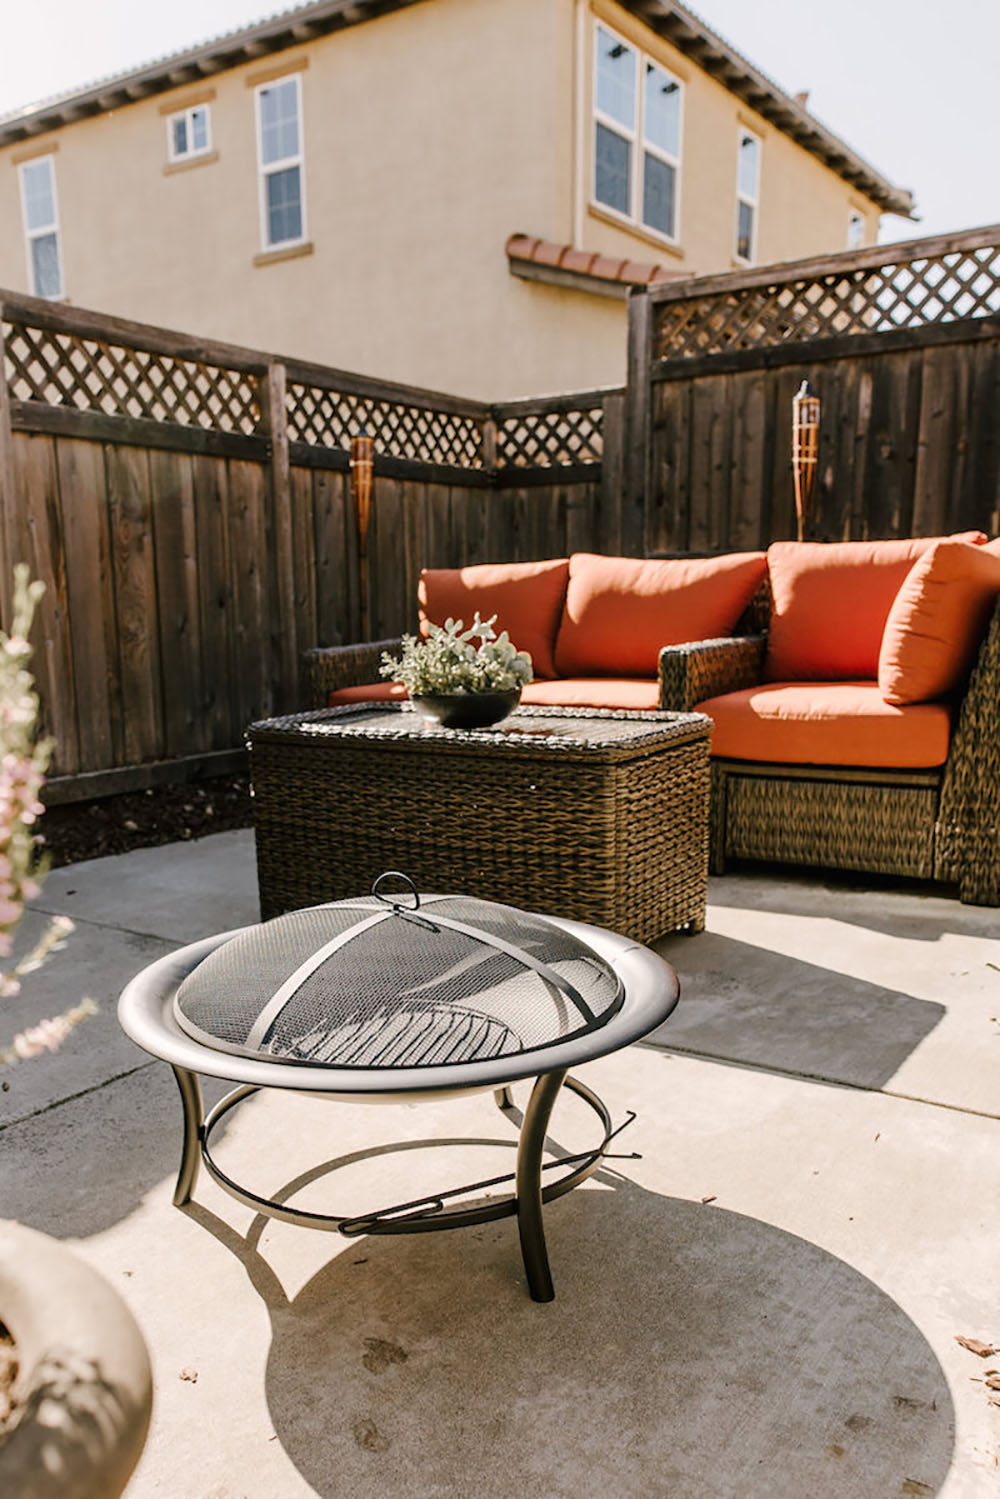 An updated patio with a fire pit, plants, and outdoor seating.